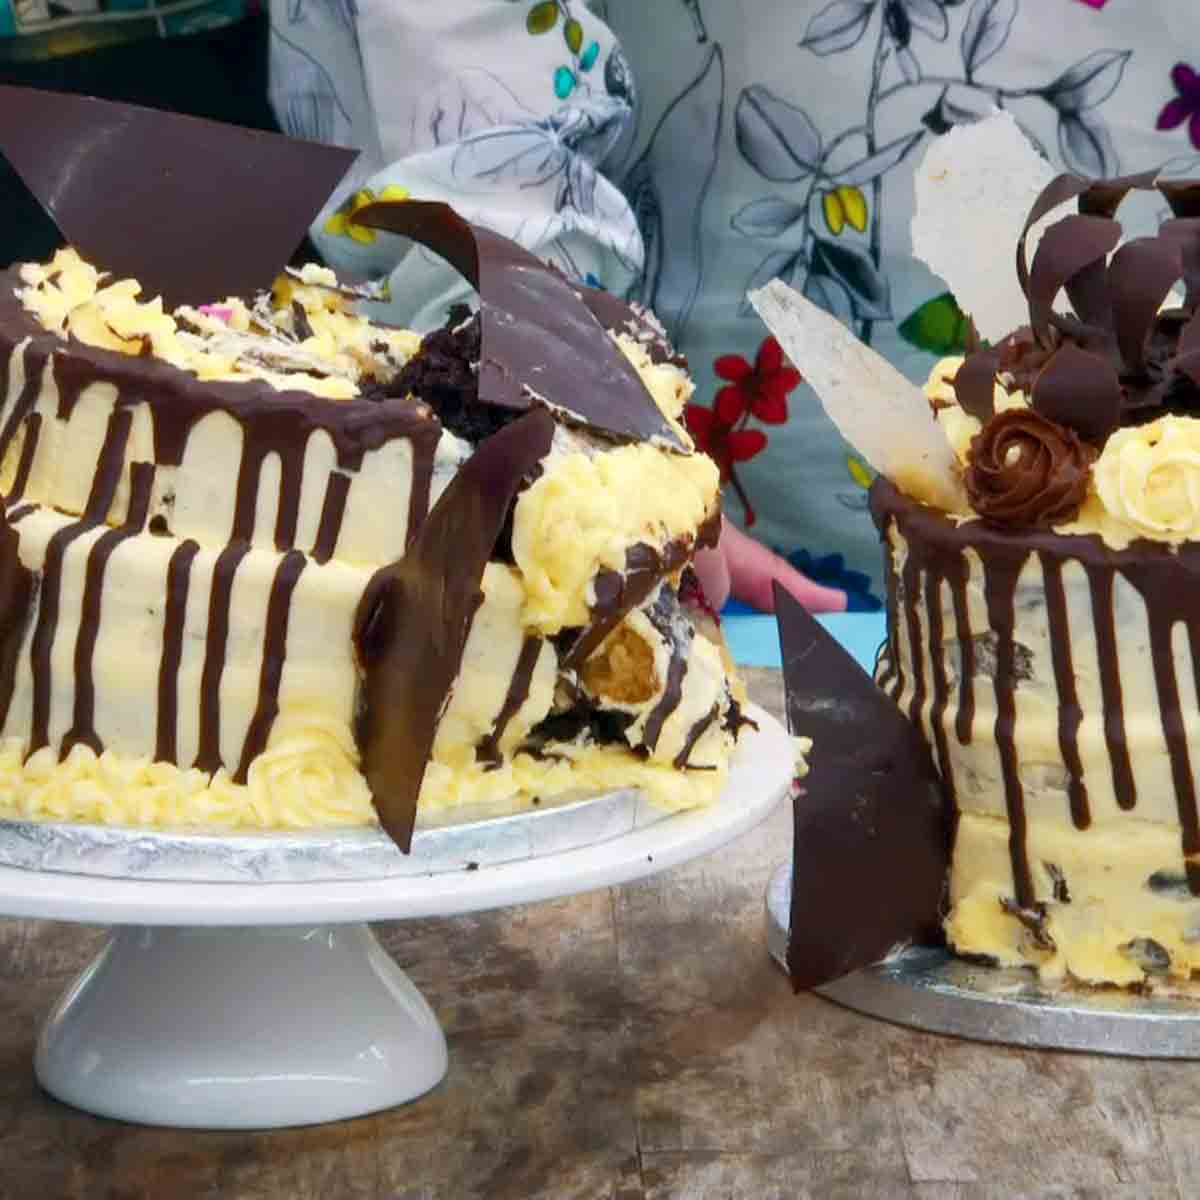 Two topple cakes in the Great British Bake Off competition judged by Paiul Hollywood.